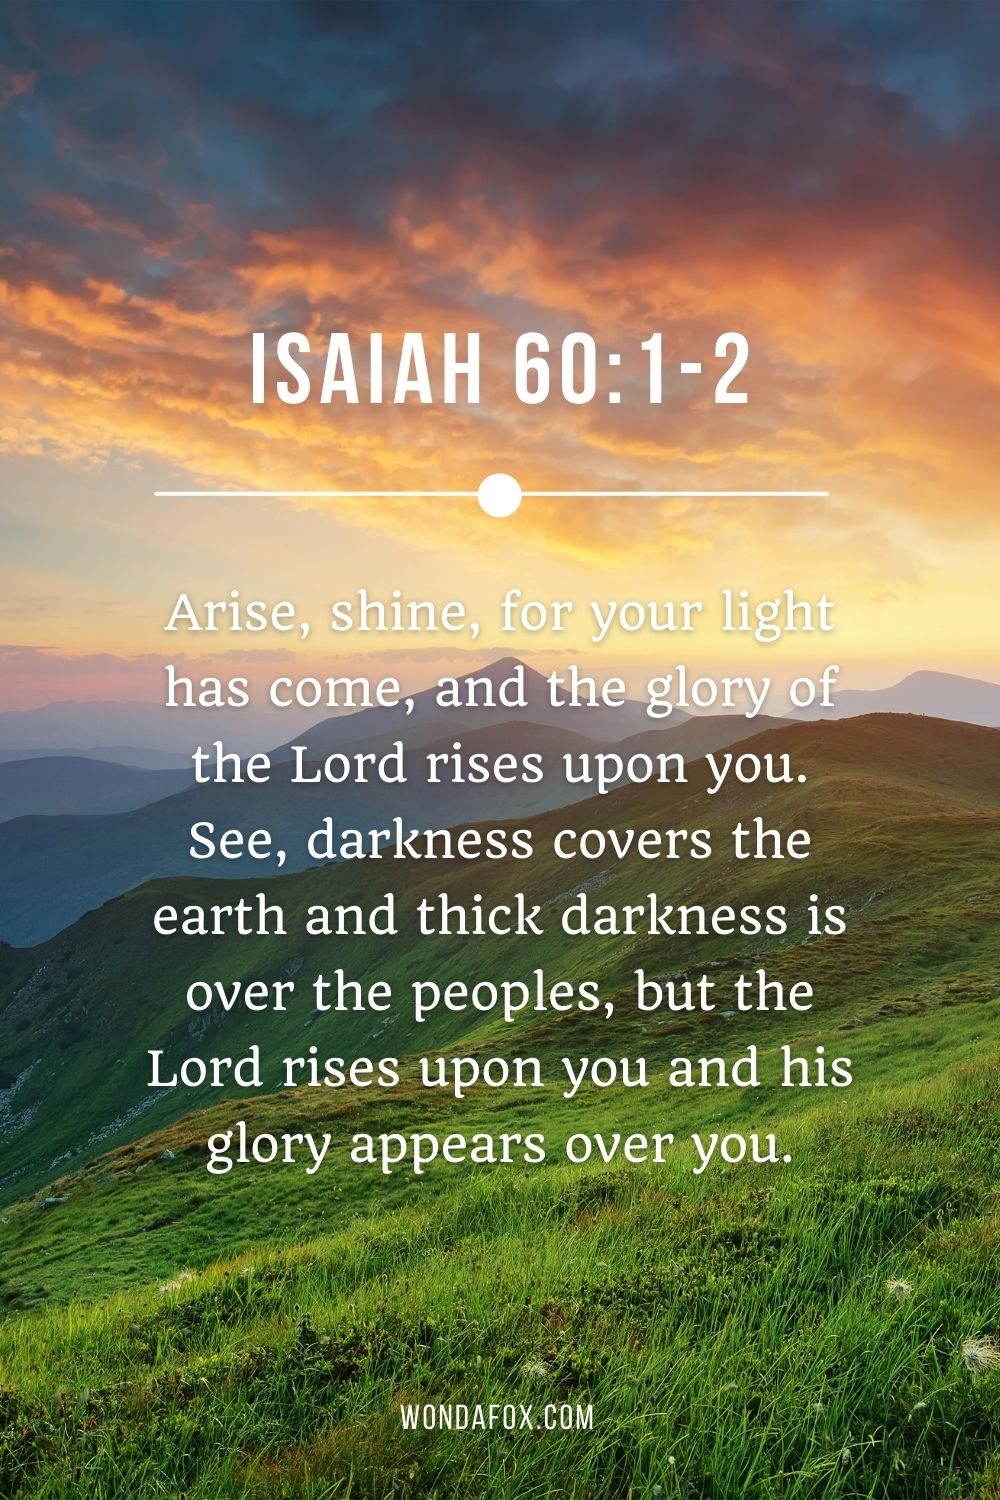 Arise, shine, for your light has come, and the glory of the Lord rises upon you. See, darkness covers the earth and thick darkness is over the peoples, but the Lord rises upon you and his glory appears over you.